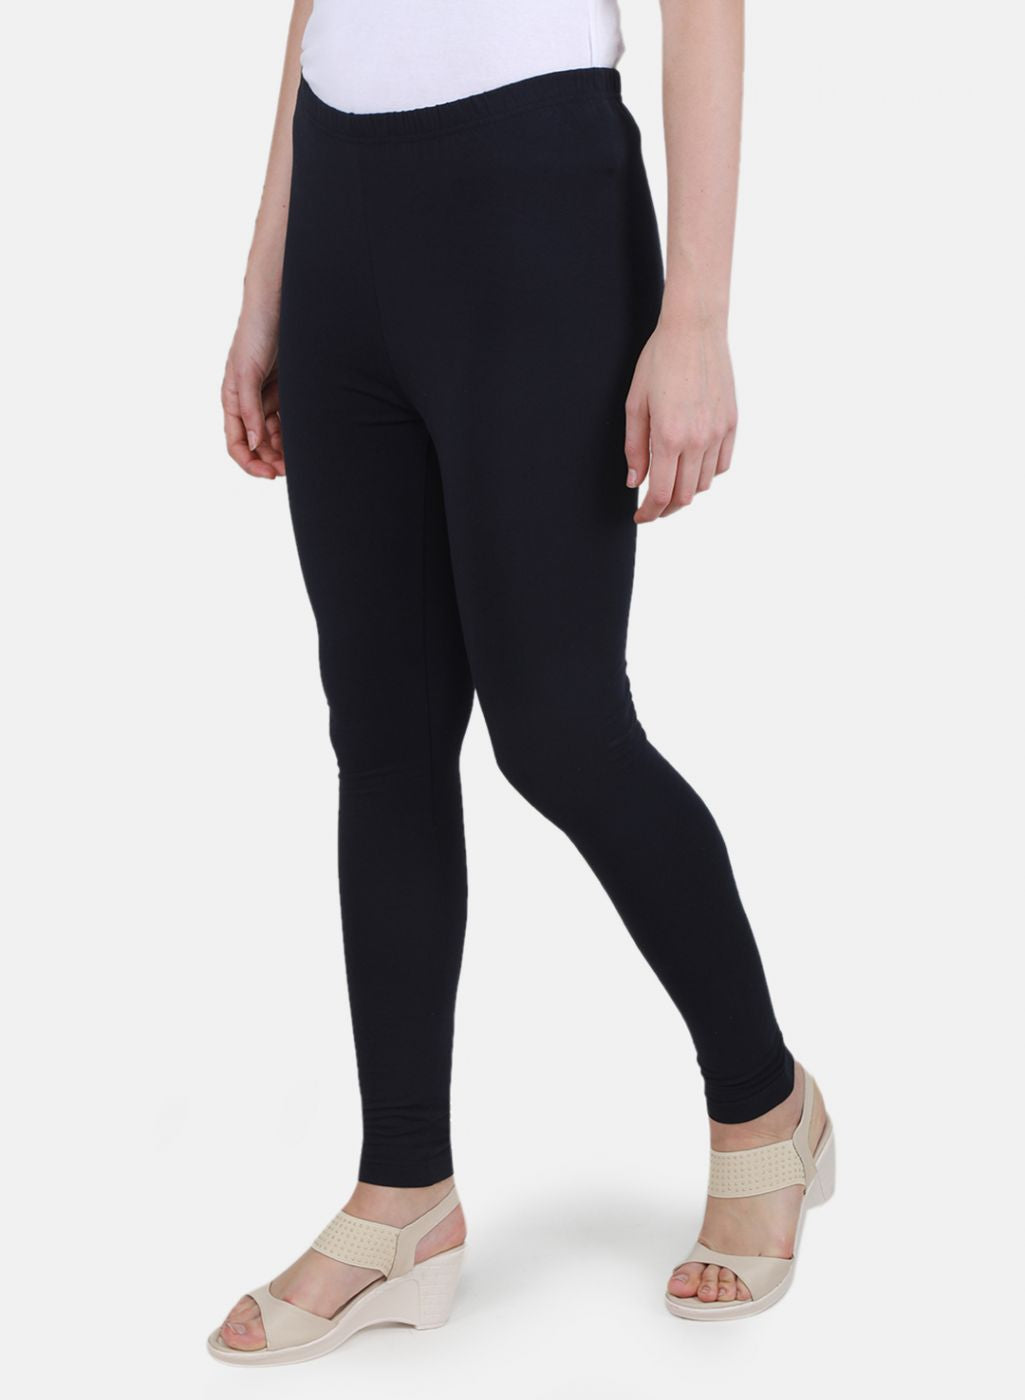 Buy Navy Blue Leggings for Women, Yoga Pants, 5 High Waist Leggings,  Buttery Soft, One Size and Plus Size Leggings, Solid Color Leggings Online  in India - Etsy